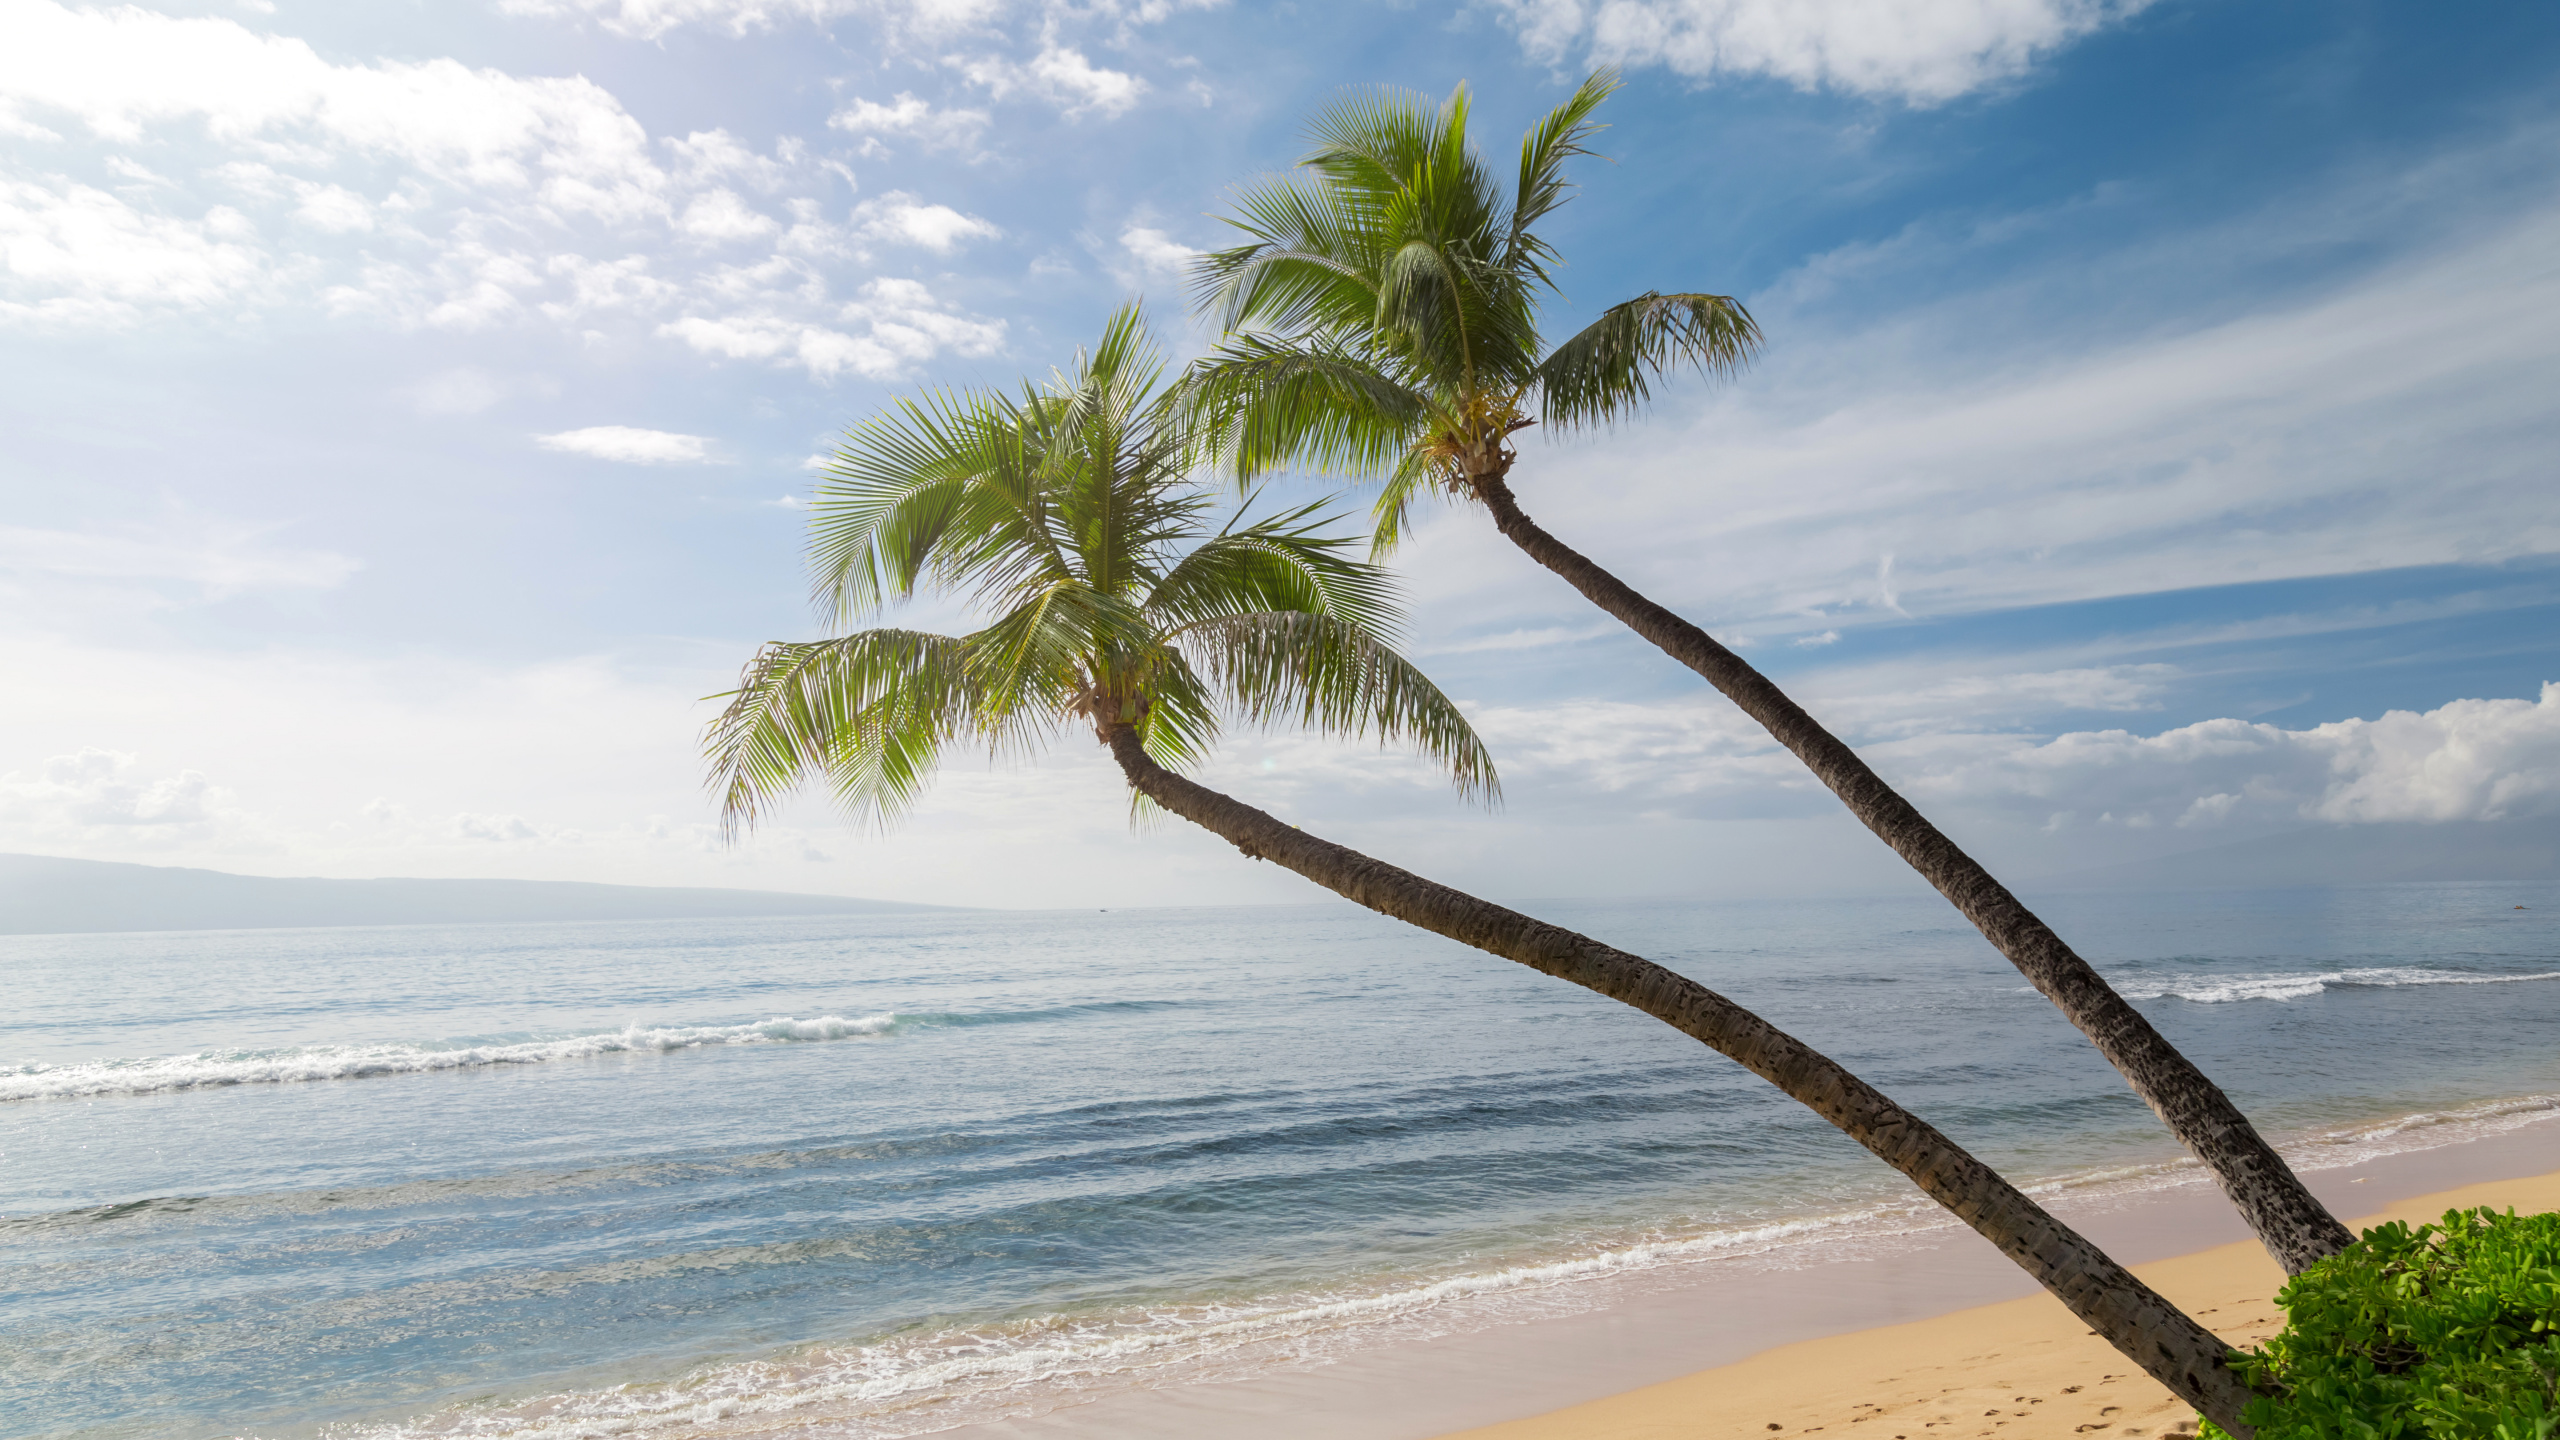 Palm Tree on Beach Shore During Daytime. Wallpaper in 2560x1440 Resolution